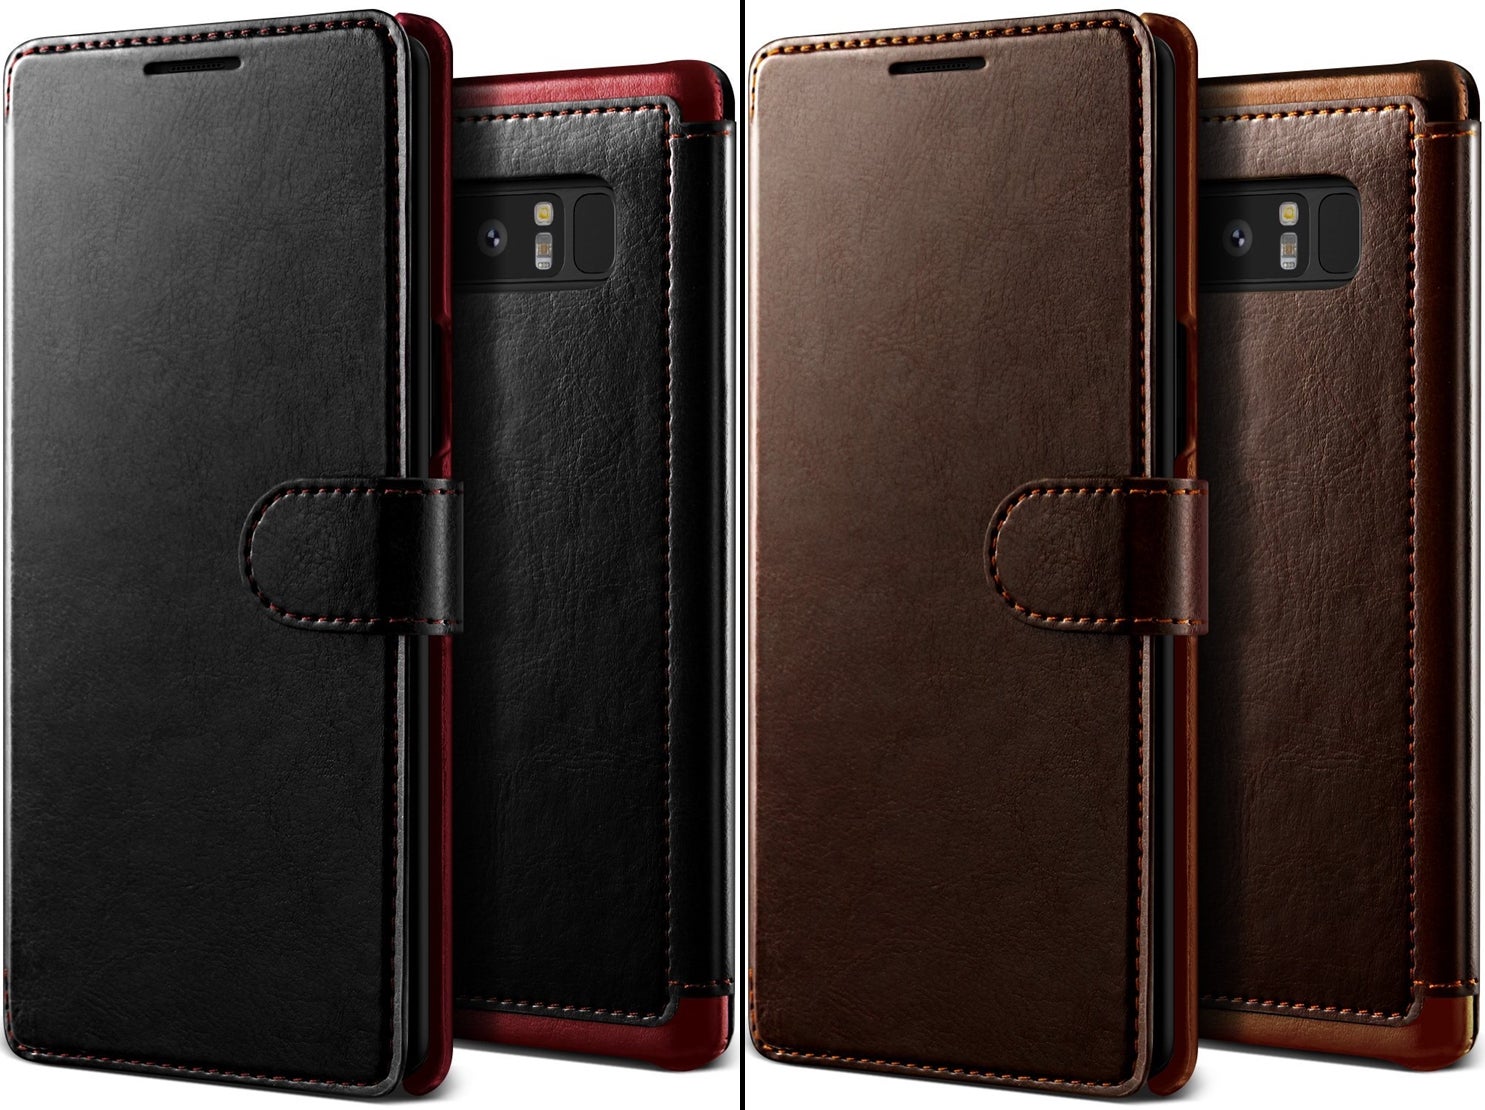 9 of the best leather cases you can get for your Galaxy Note 8